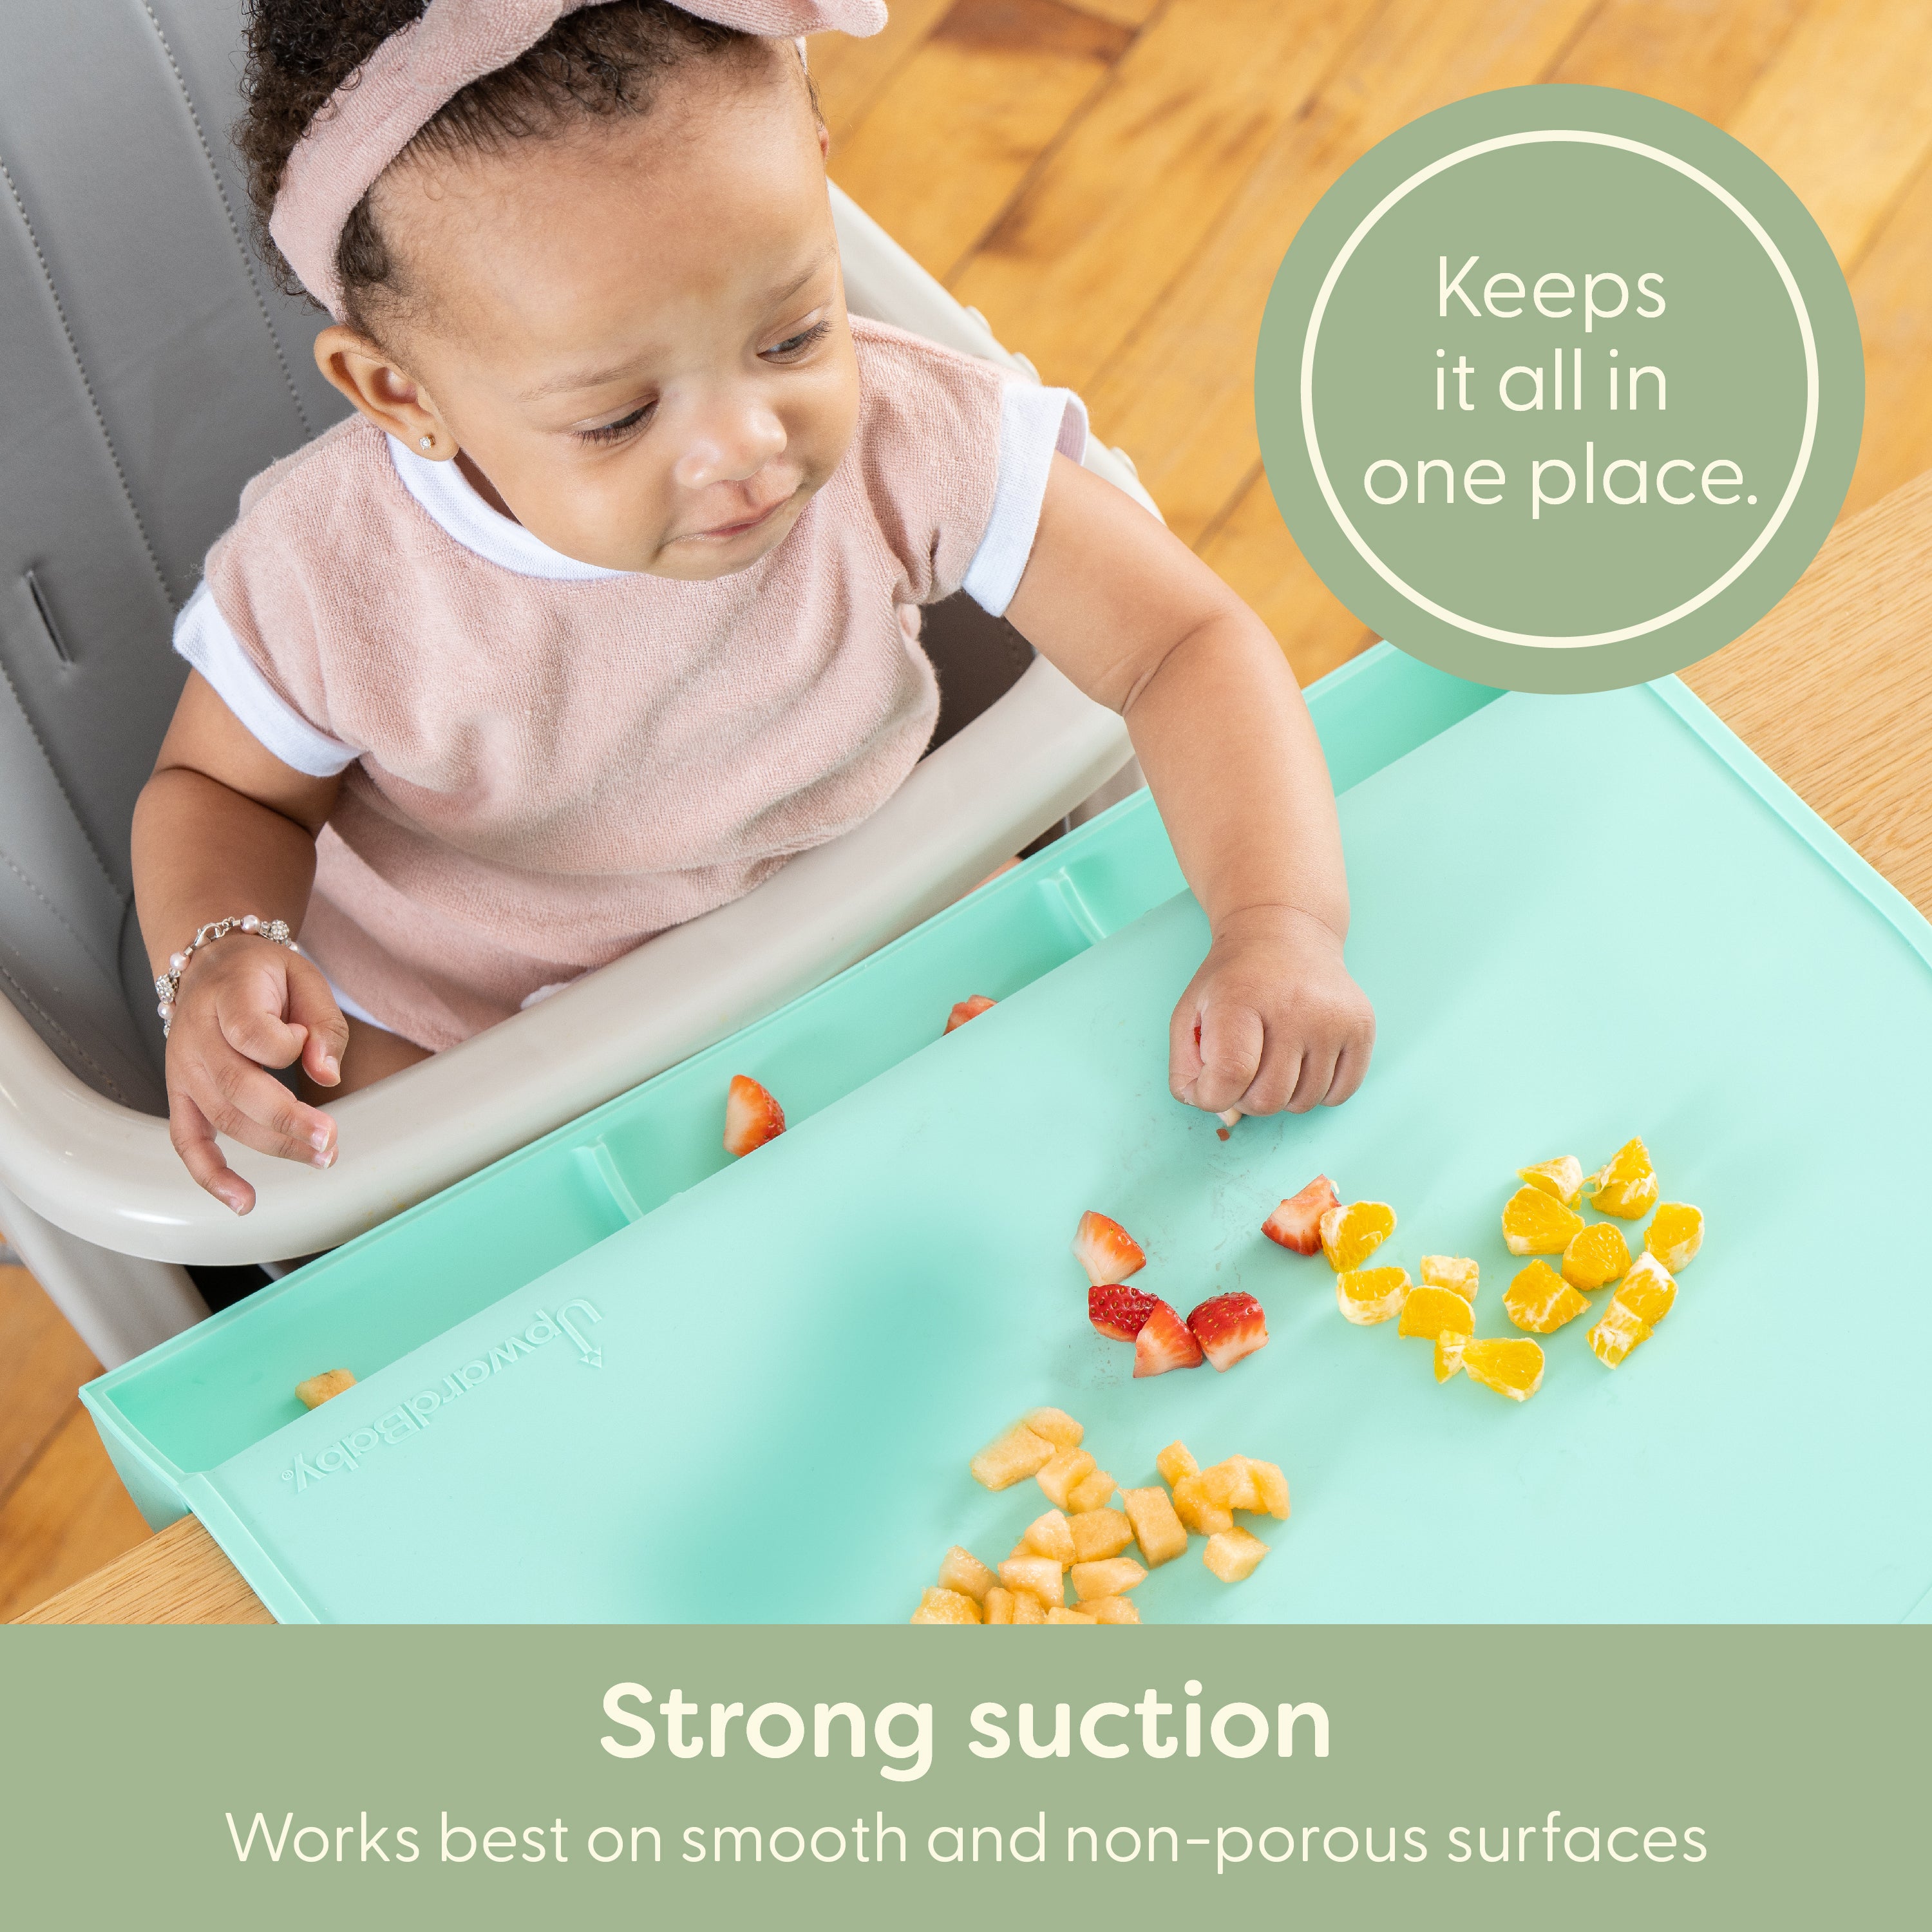 Food Catching Baby Placemat with Suction - UpwardBaby Gray Silicone Placemats for Kids Babies and Toddlers - Clean Mealtimes at Home or for